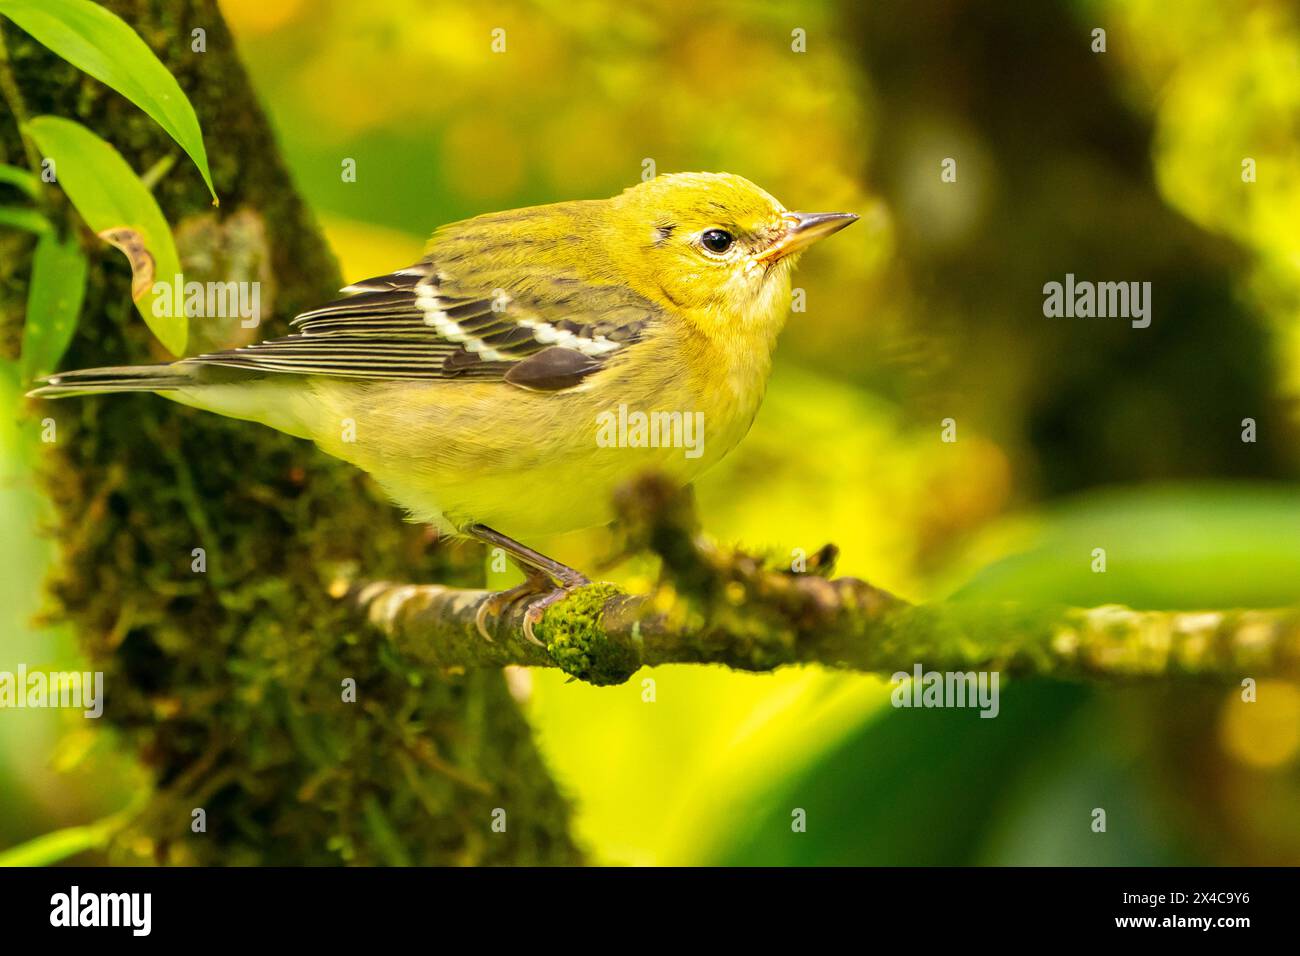 Costa Rica, Arenal Observatory. Bay-breasted warbler bird close-up. Stock Photo